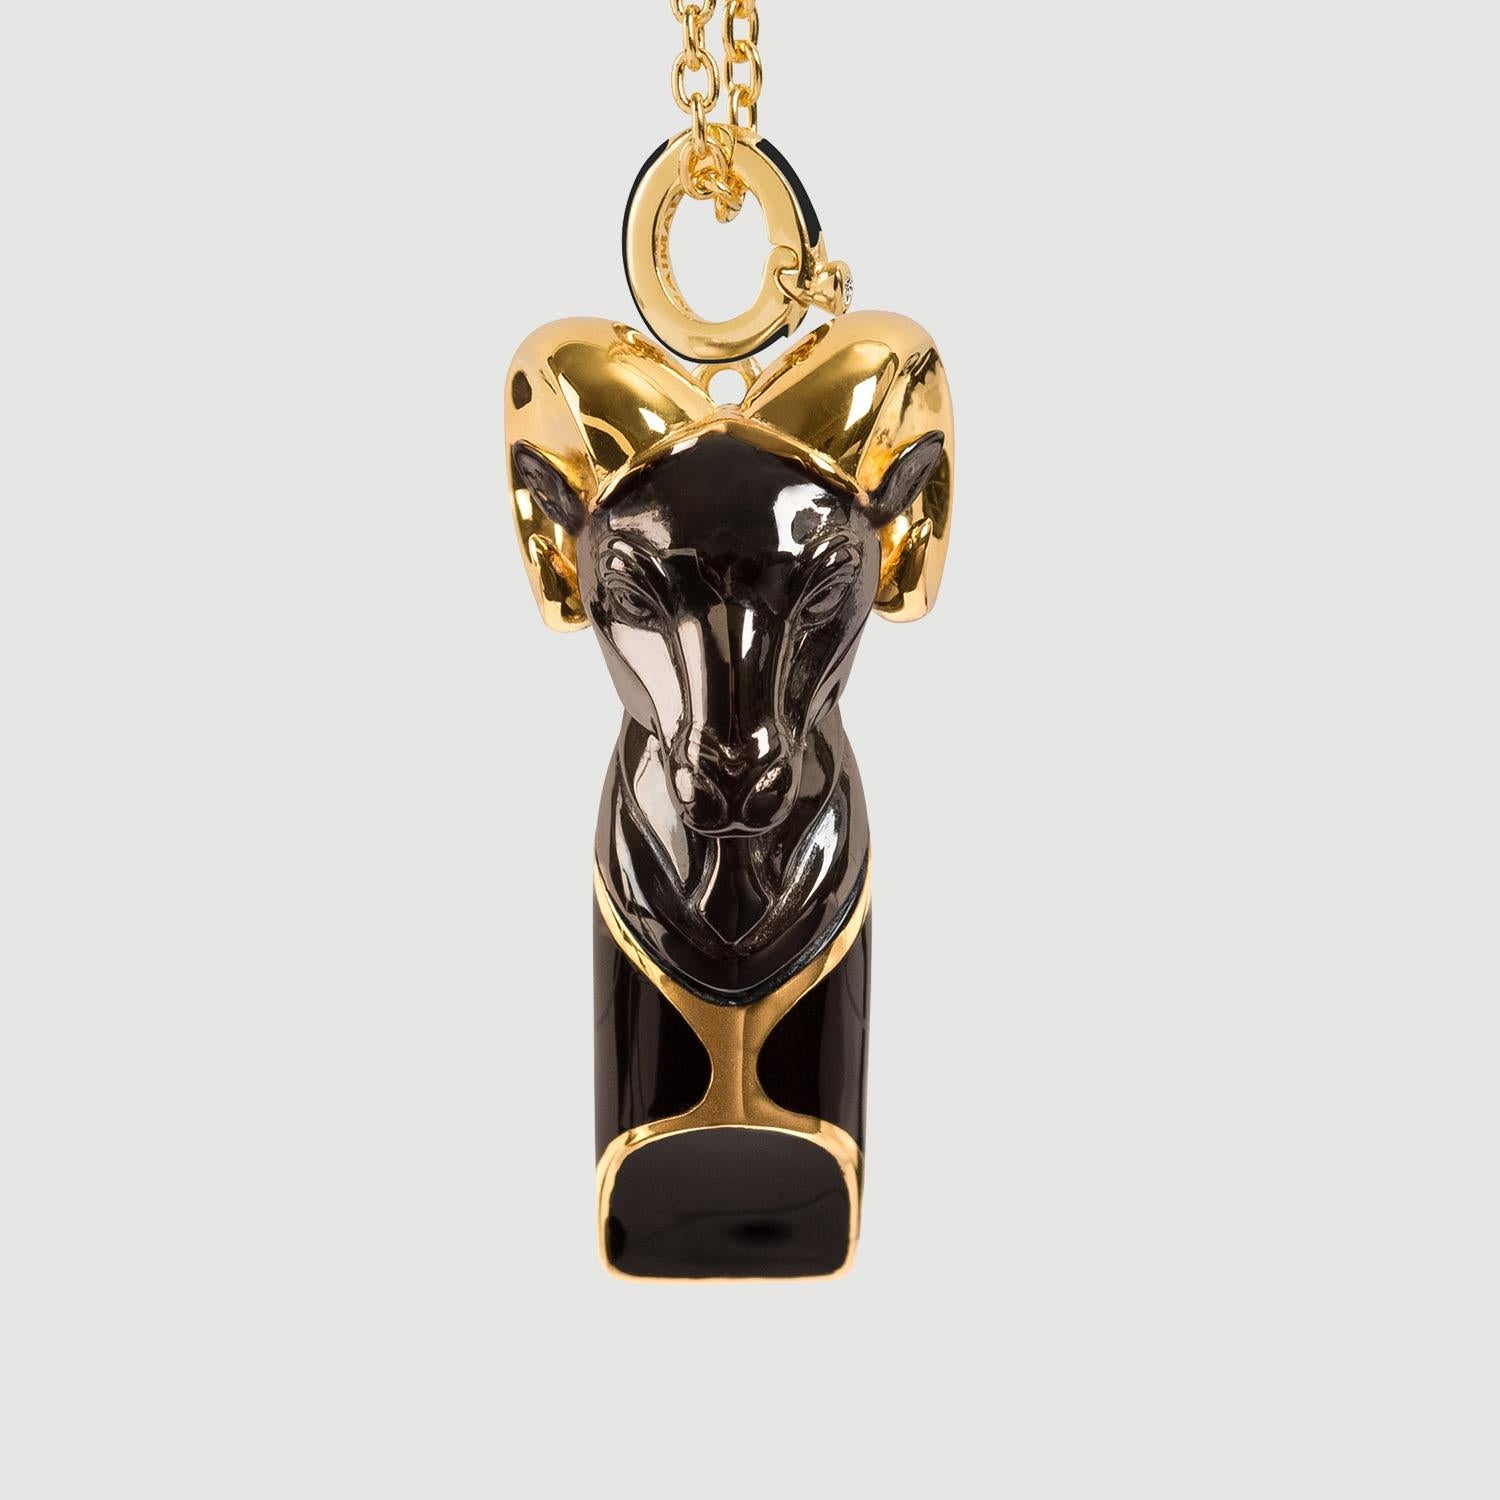 Introducing our stunning gold vermeil pendant necklace - a functional whistle with a modern twist on antique dog whistles. This unique piece is perfect for those who value both style and practicality. With its sleek design and high-quality